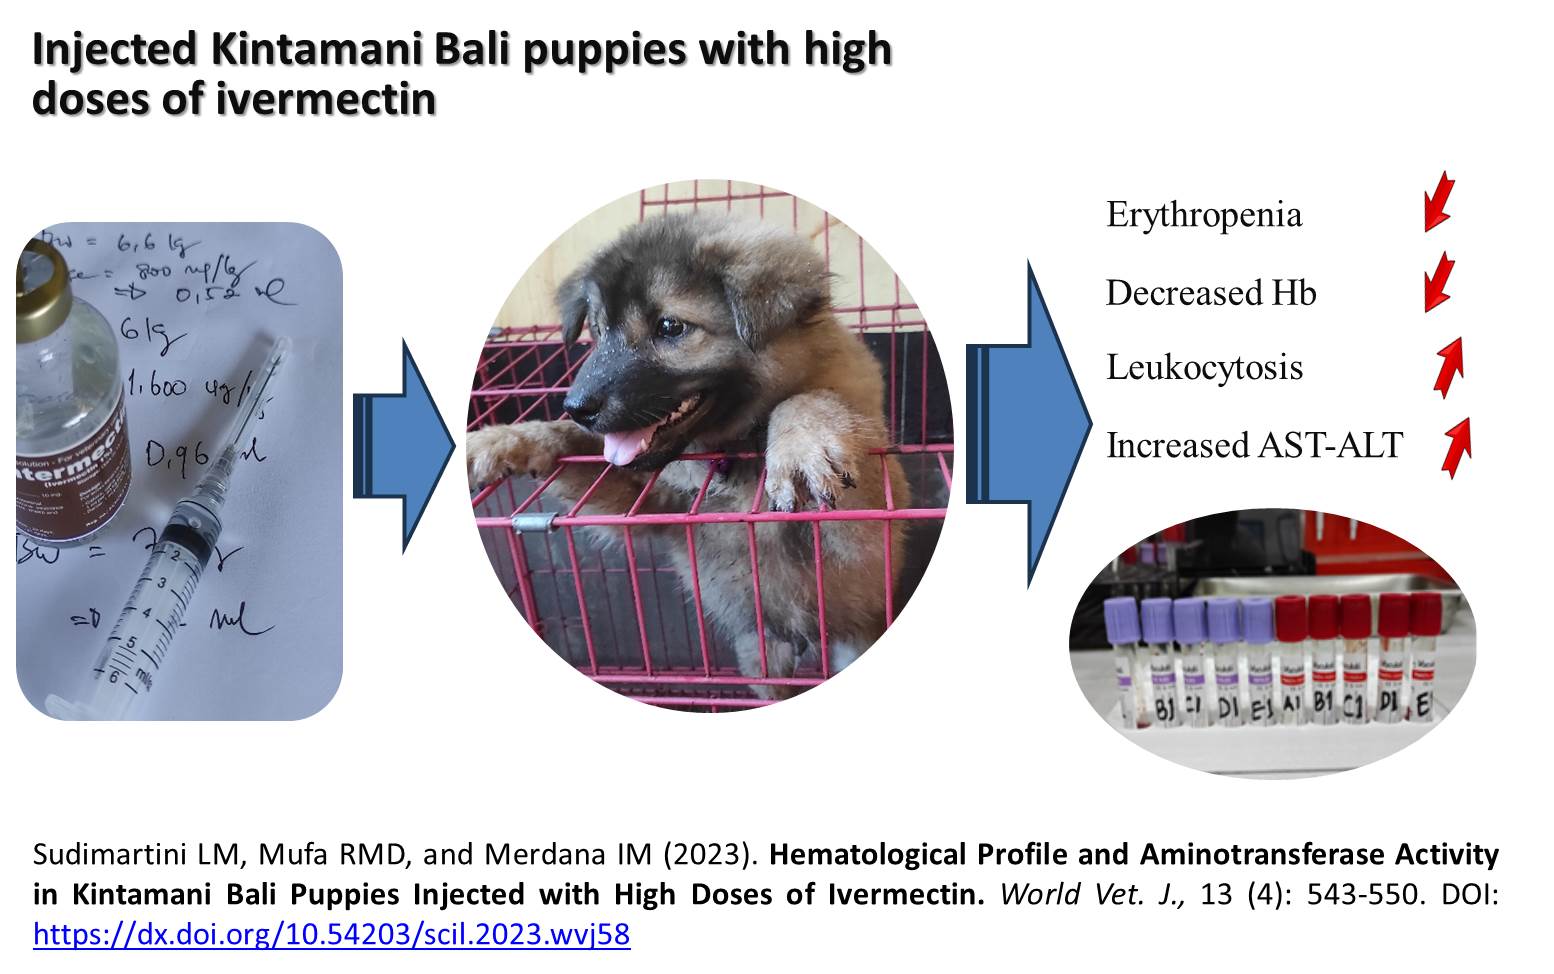 261-Kintamani_Bali_Puppies_Injected_with_High_Doses_of_Ivermectin